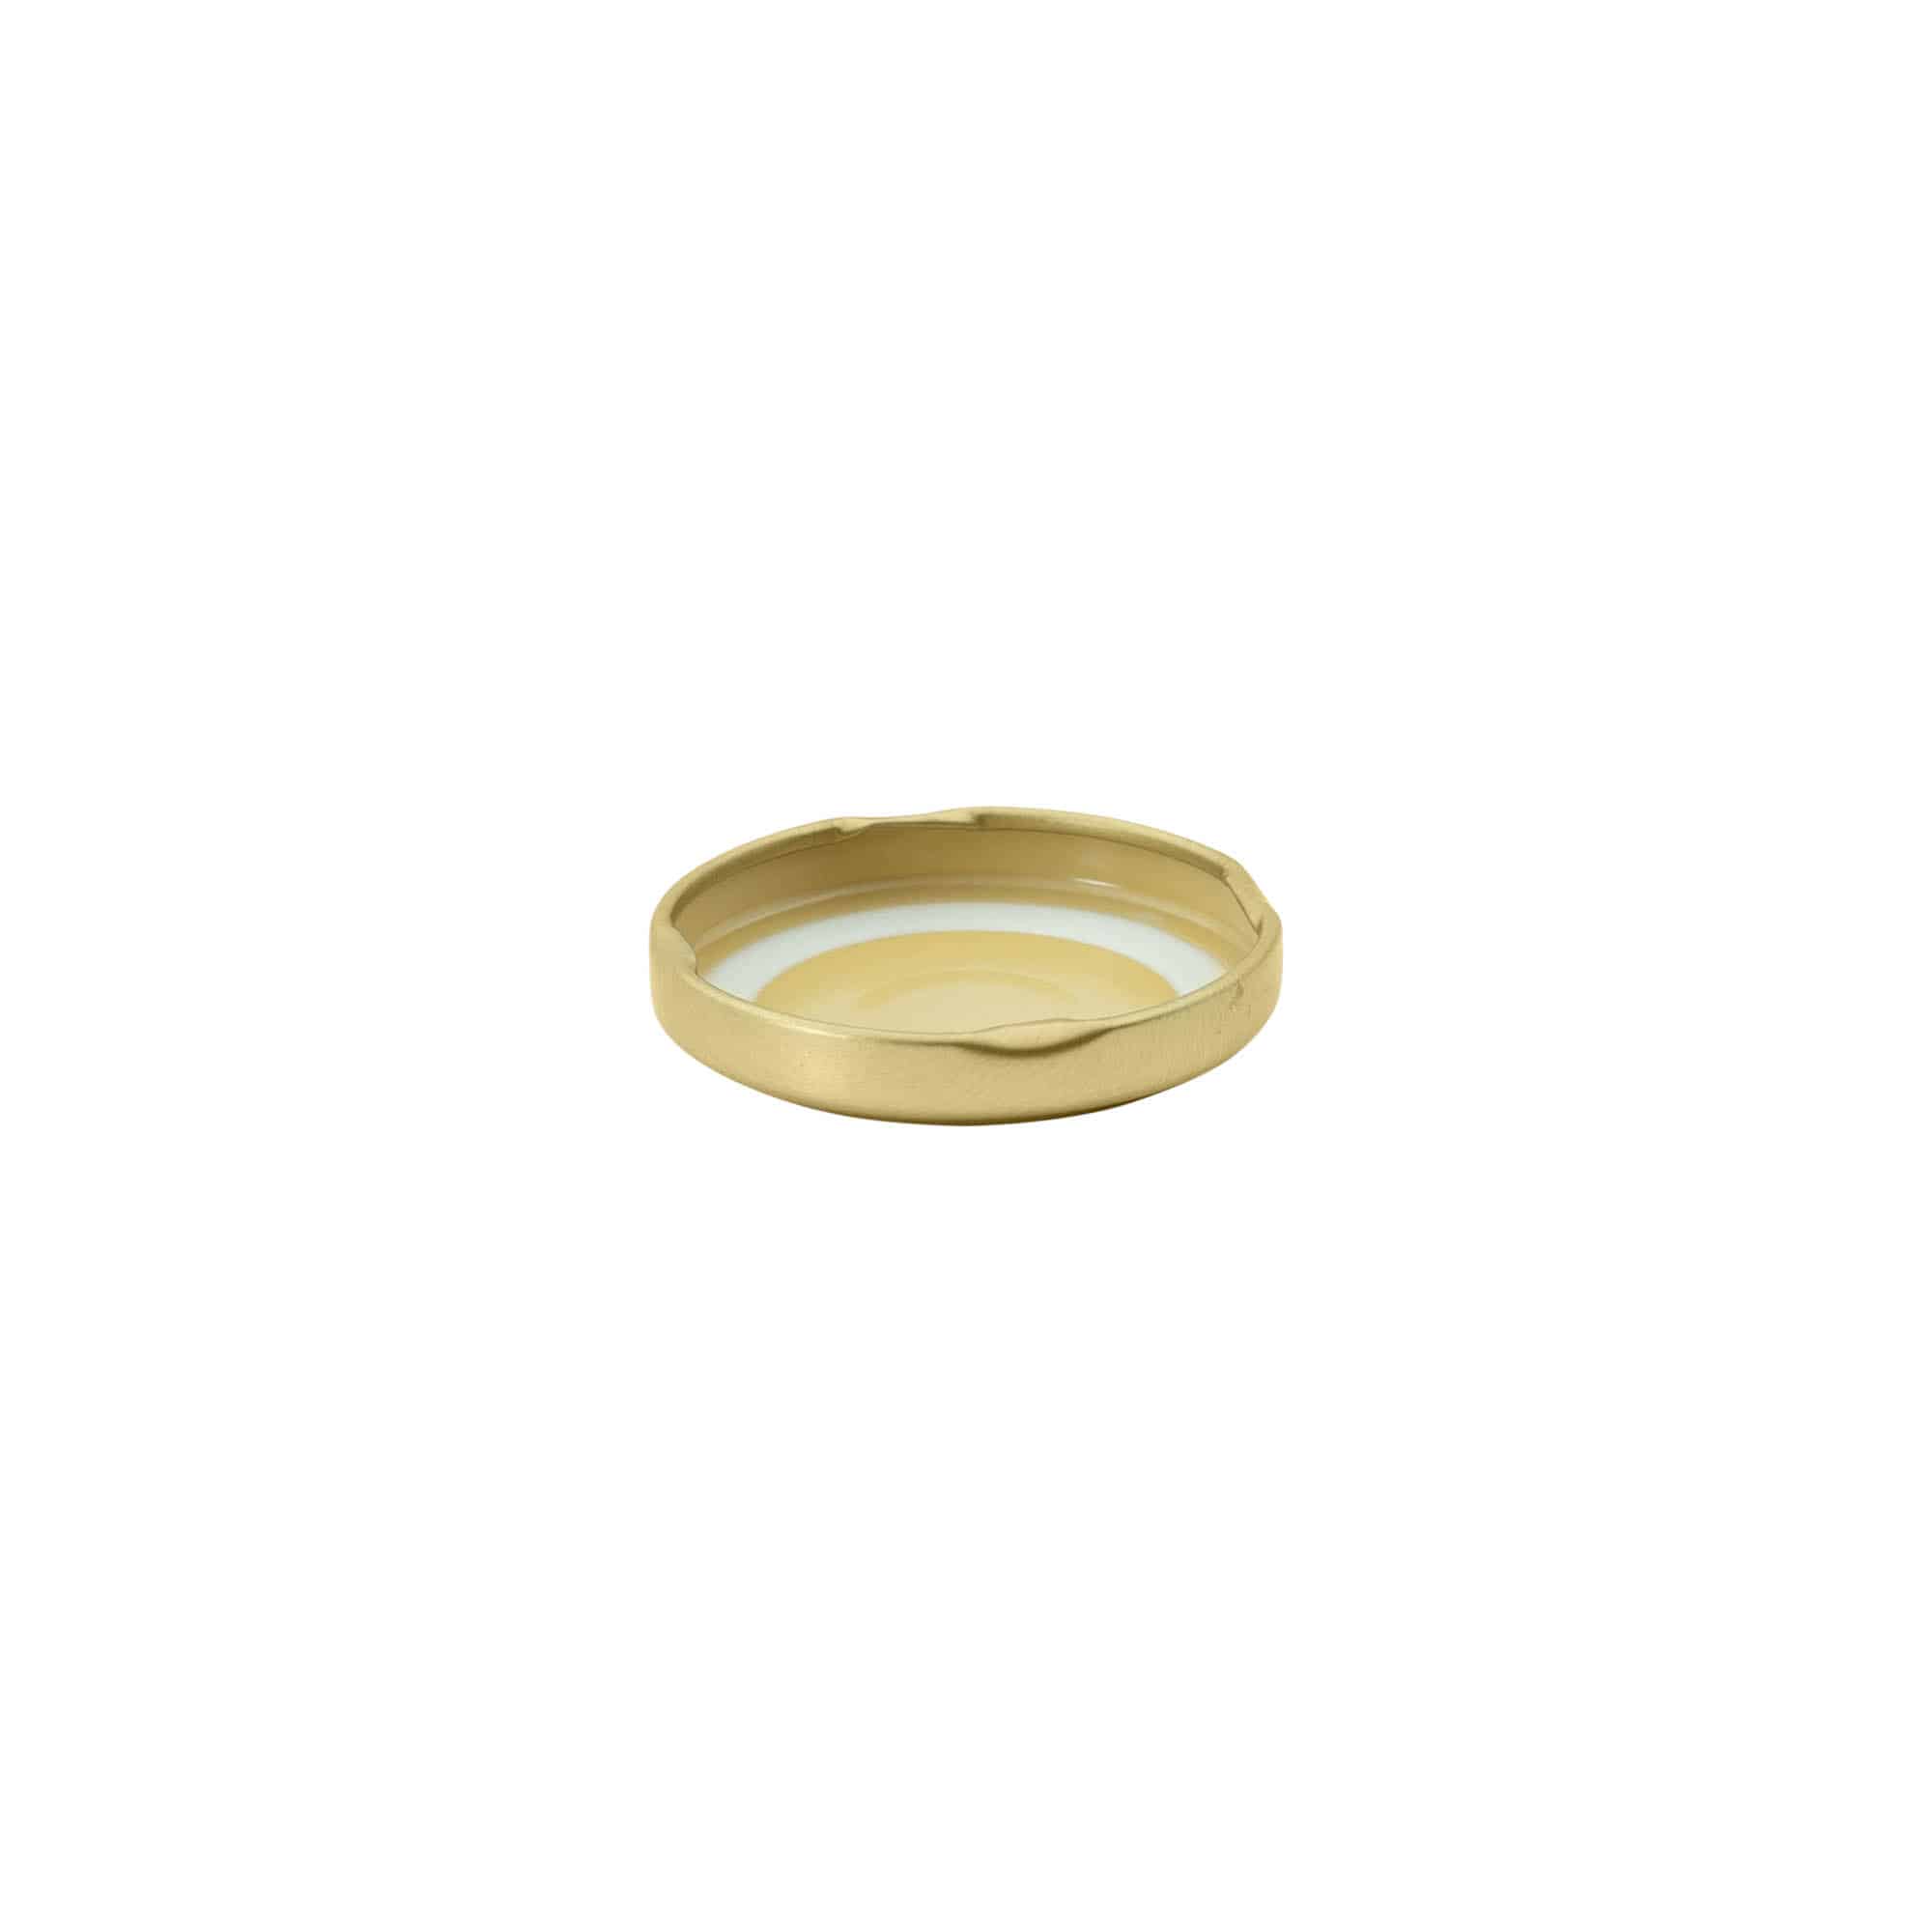 Twist off lid, tinplate, gold, for opening: TO 48